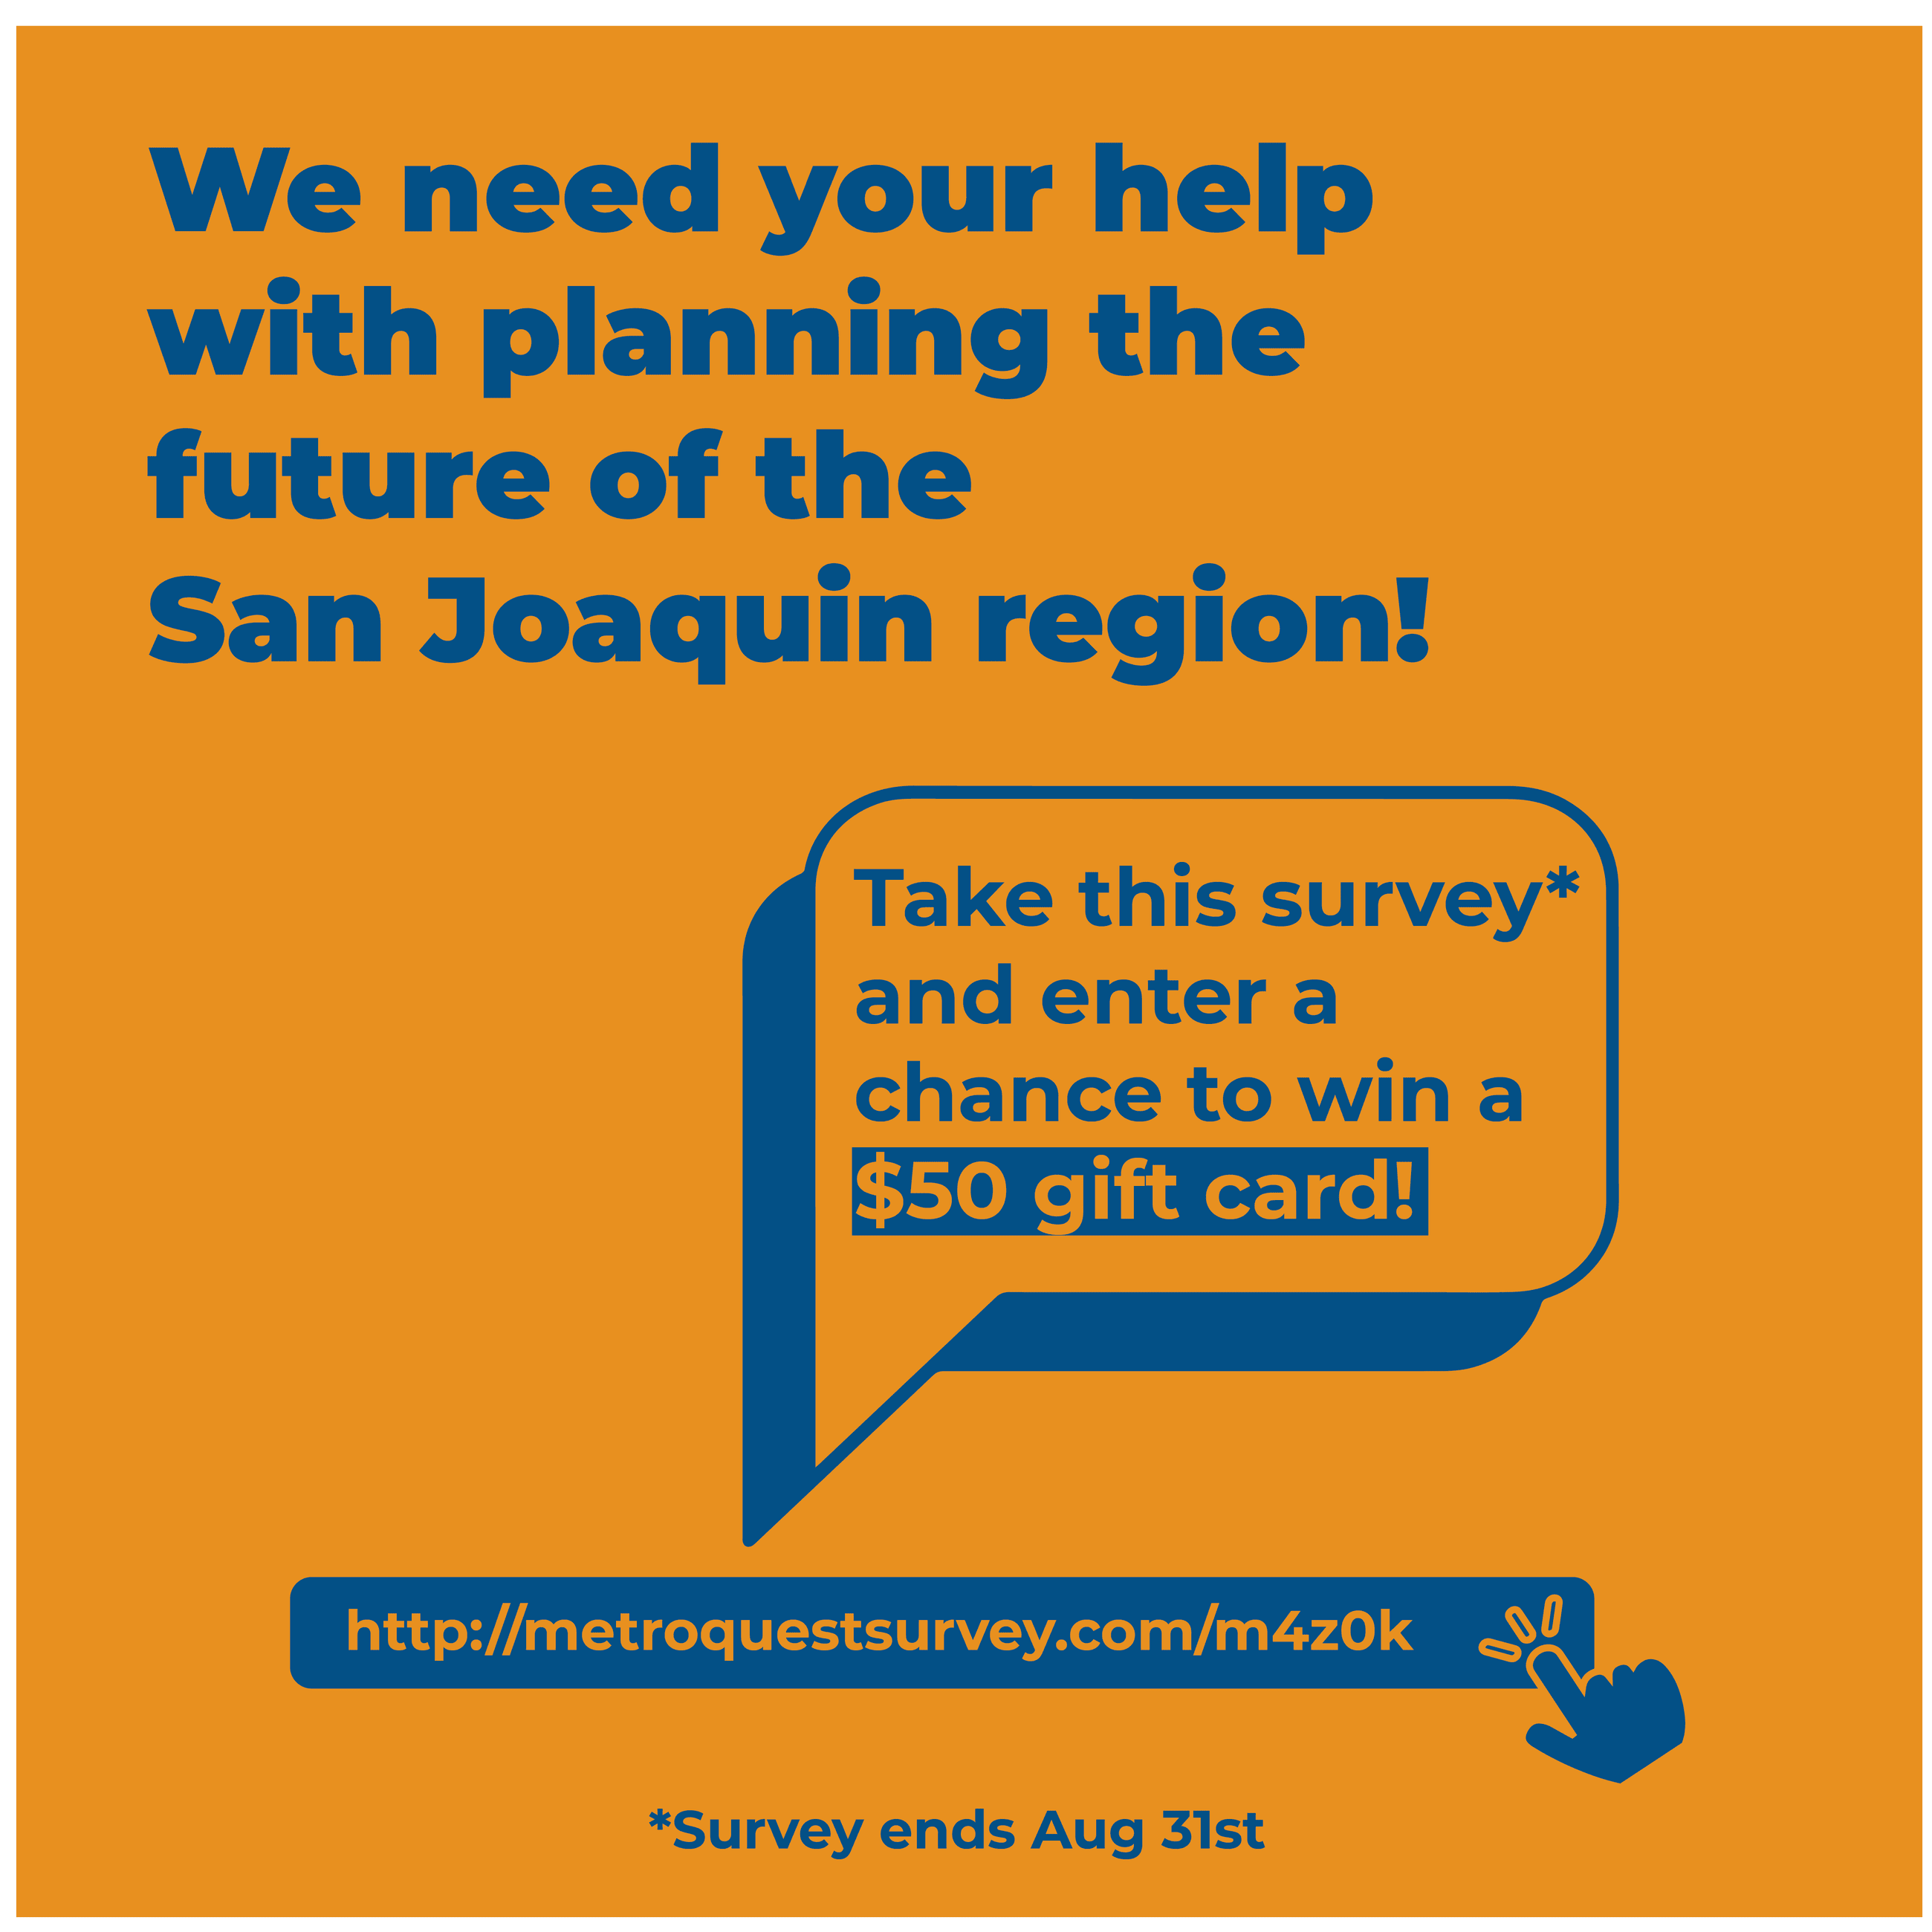 Plan for the future of San Joaquin!